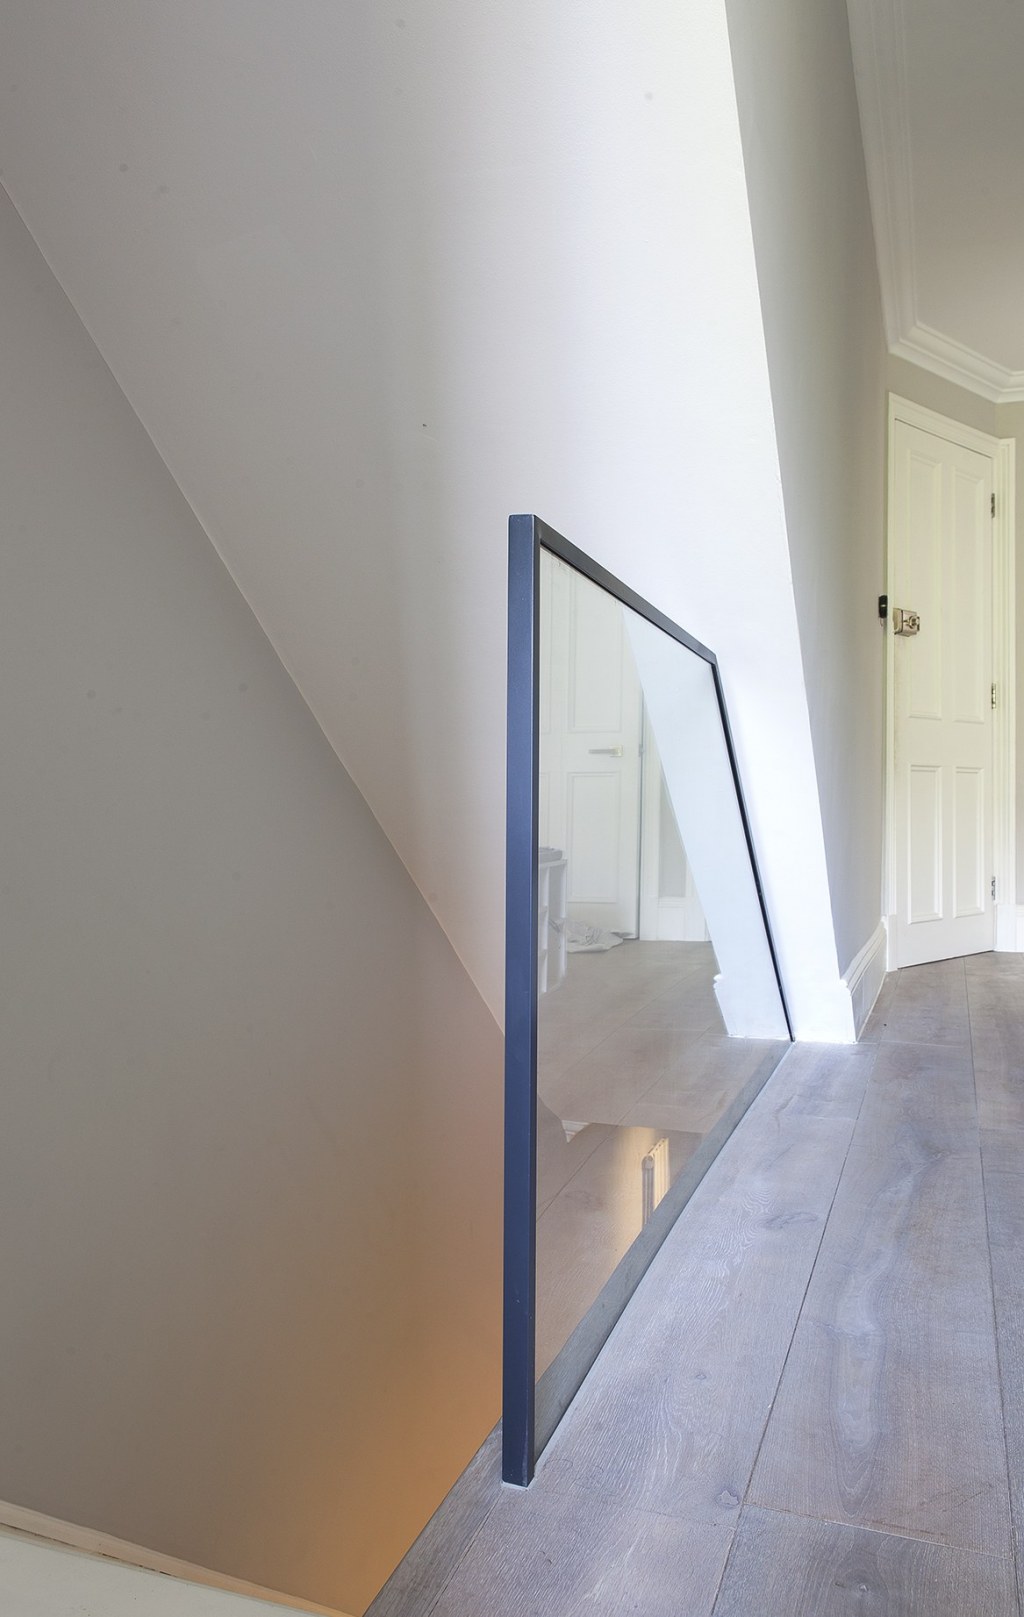 Kentish Town / Glass stair banister